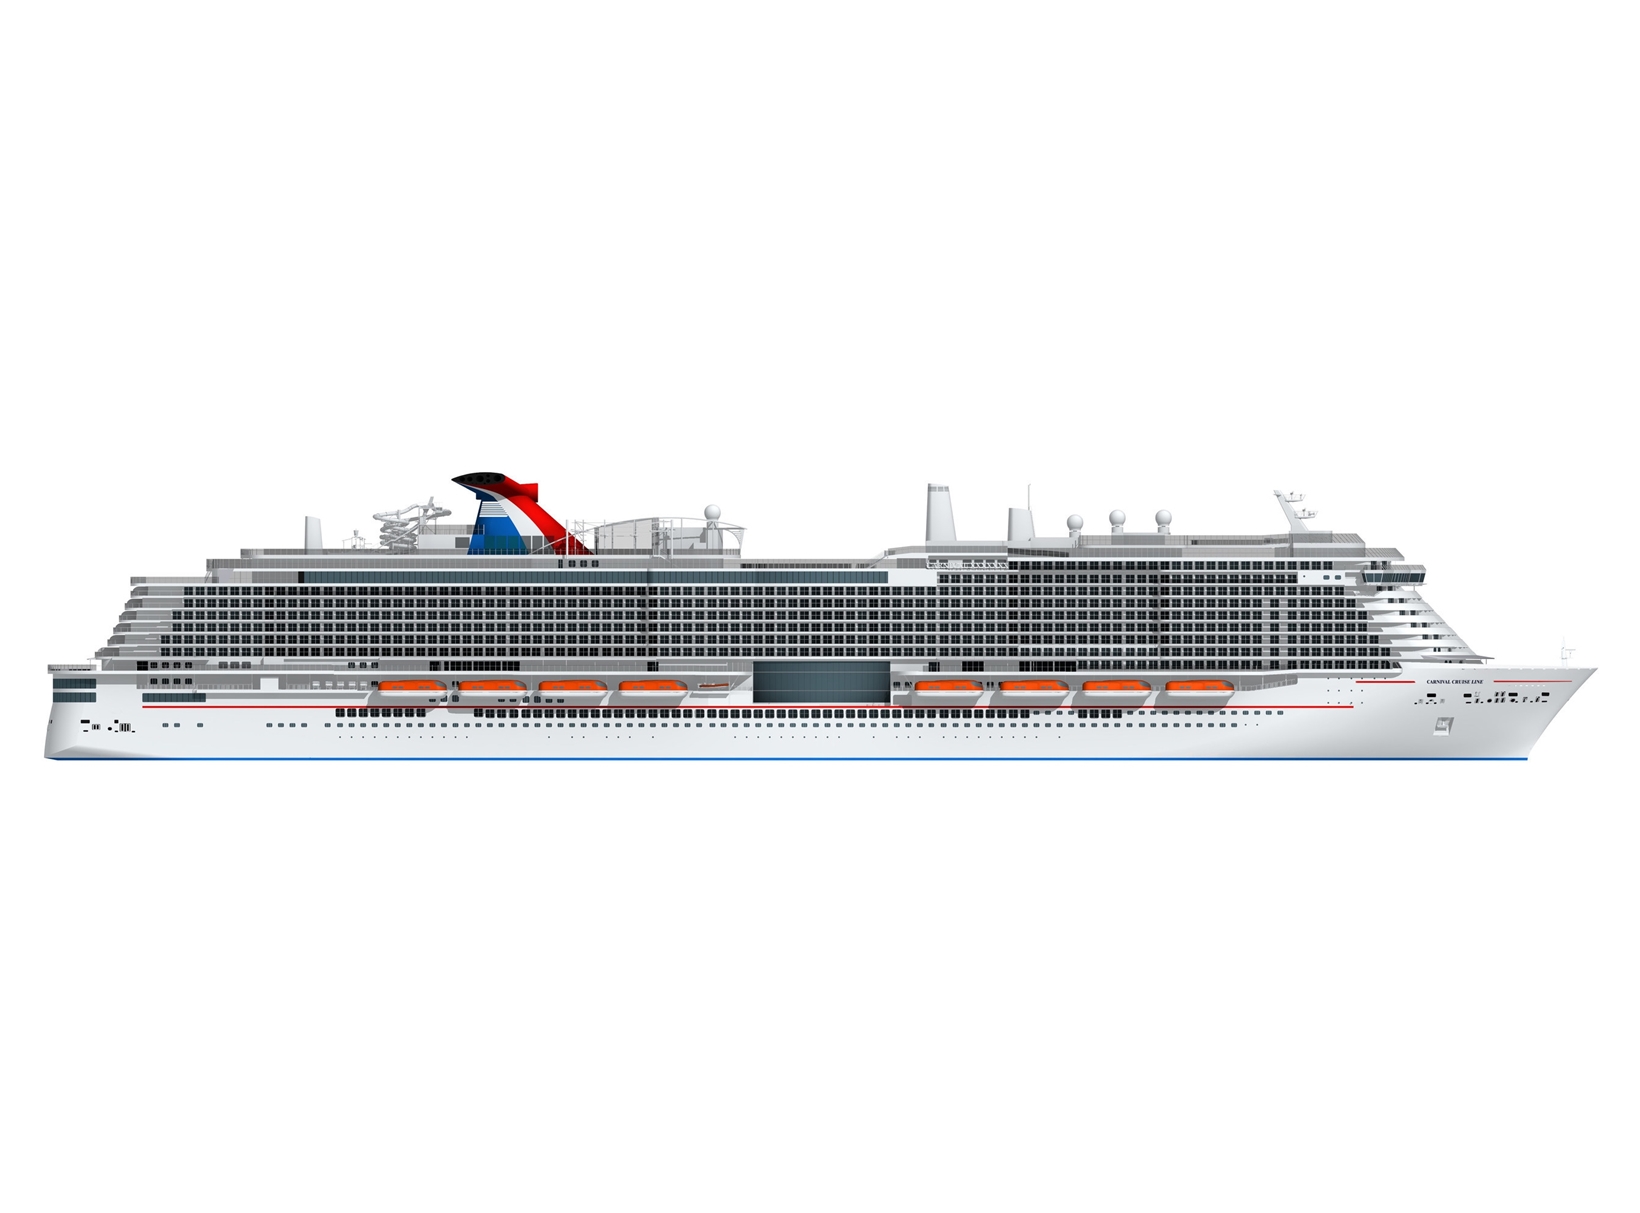 Carnival Cruise to homeport LNG liner at Canaveral